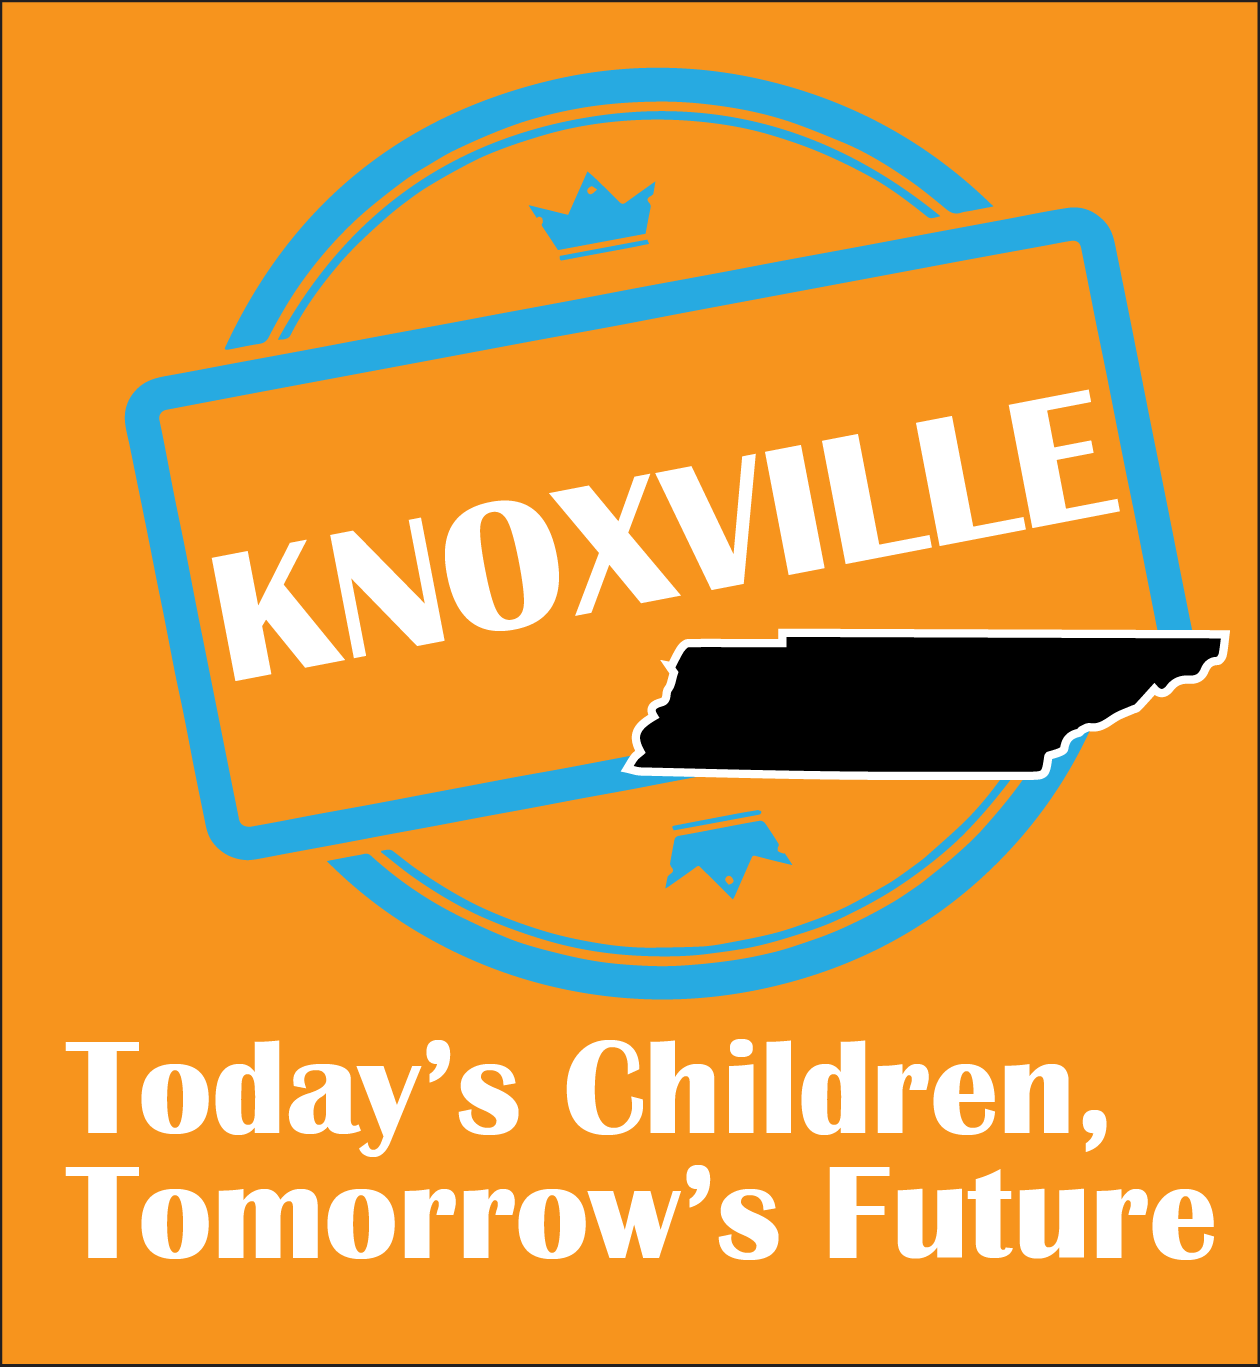 Image for Today's Children Tomorrow's Future - Knoxville